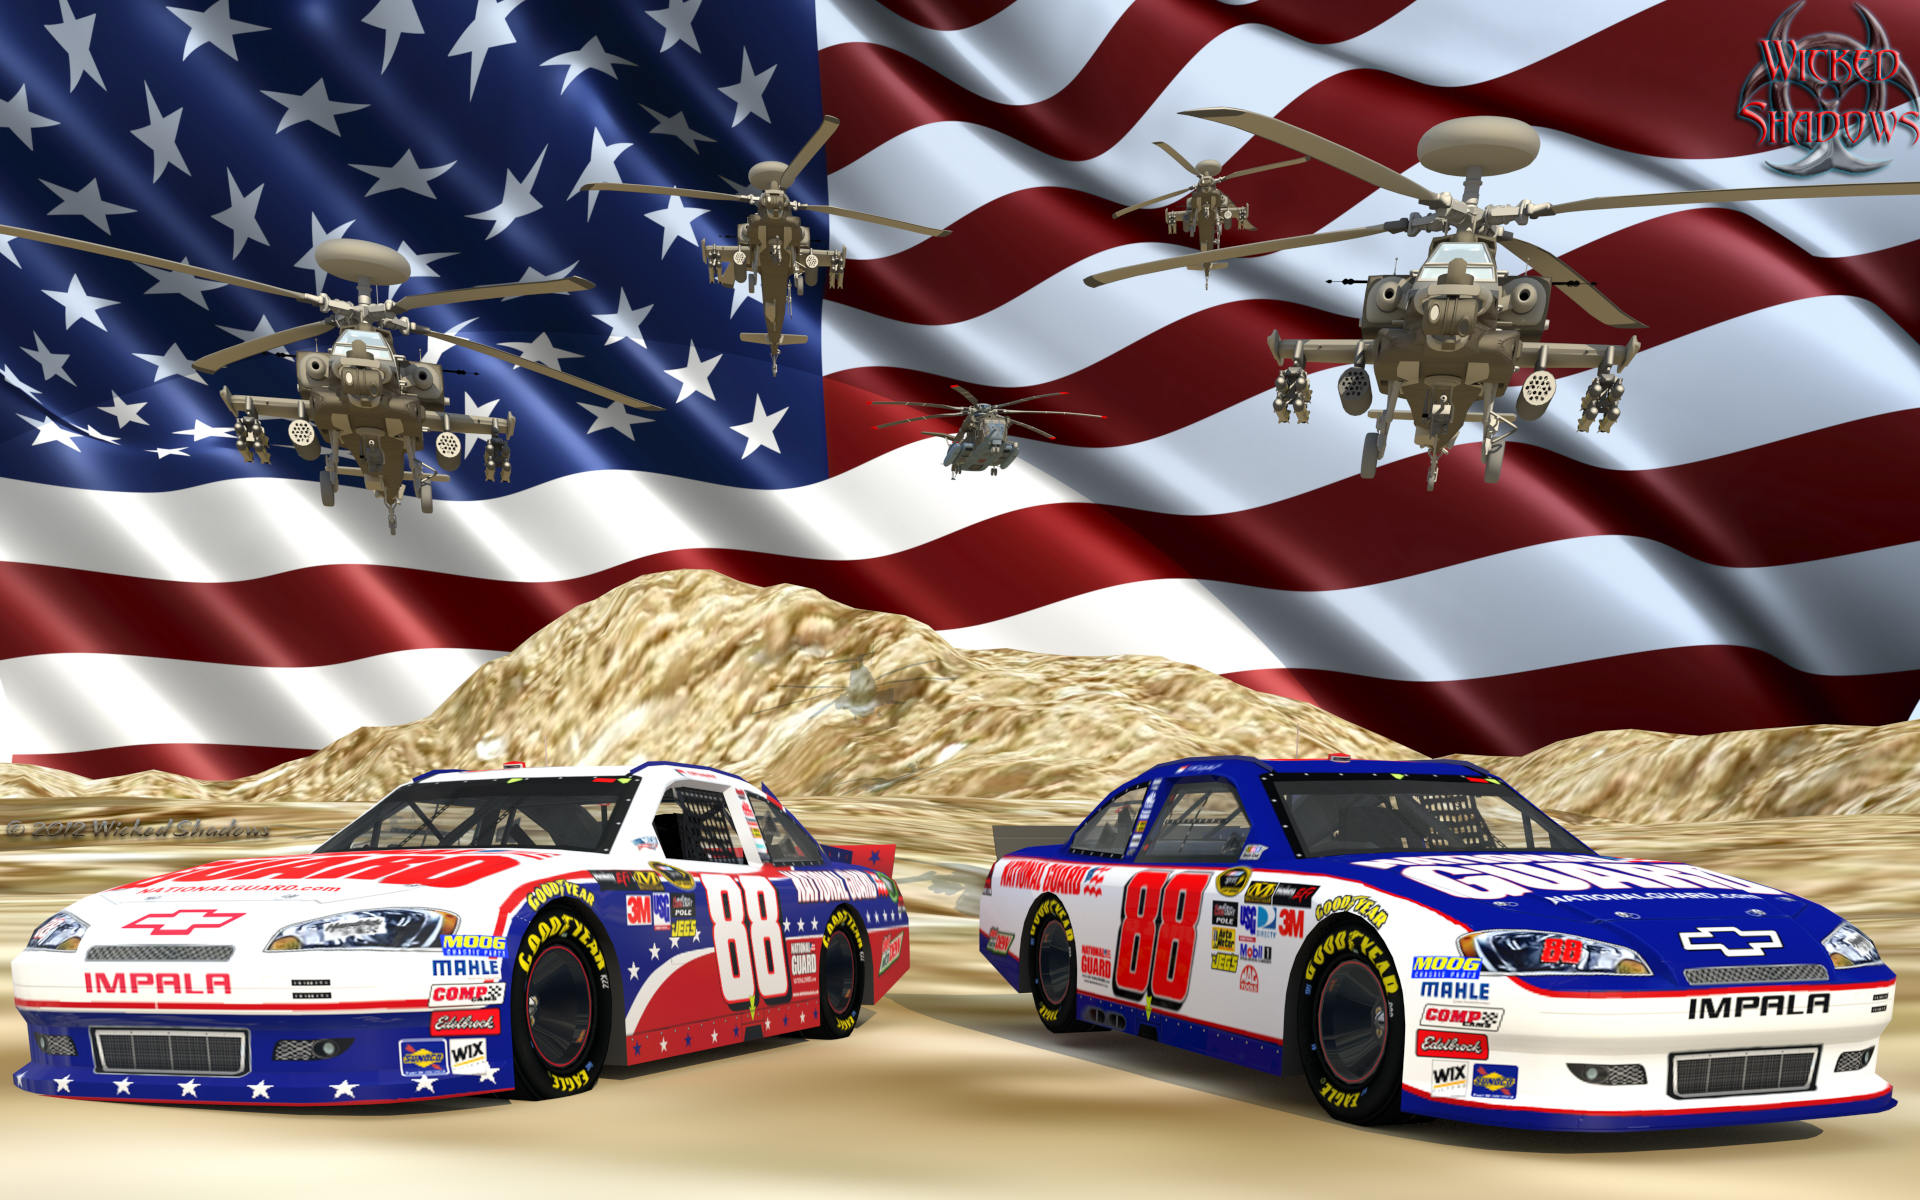 Wallpapers By Wicked Shadows Dale Earnhardt Jr Nascar Unites 1920x1200